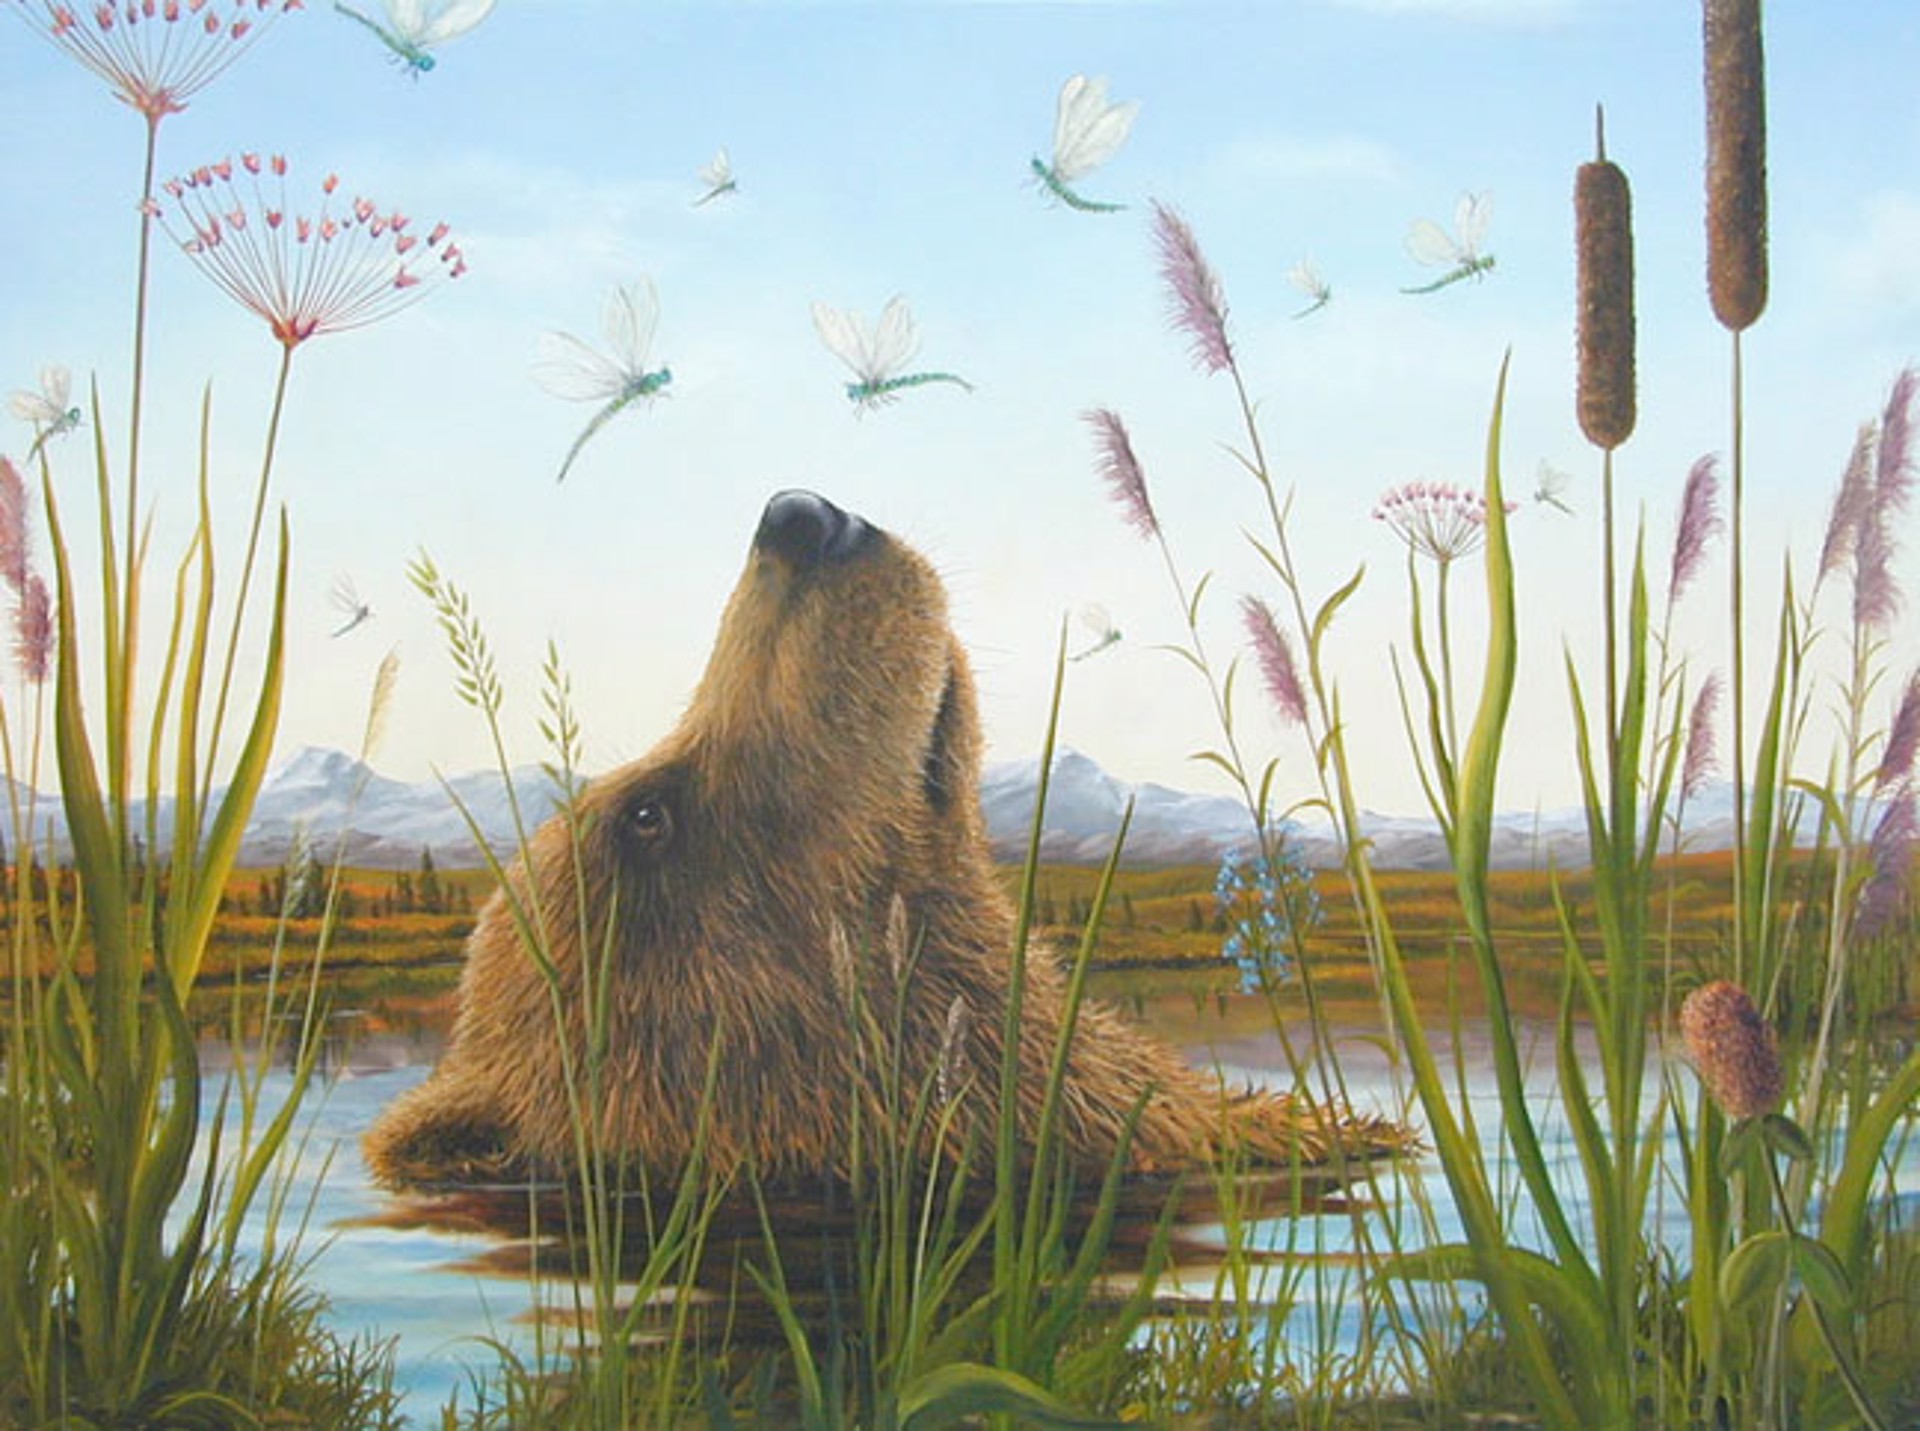 The Dance - SOLD OUT ON ALL EDITIONS by Robert Bissell